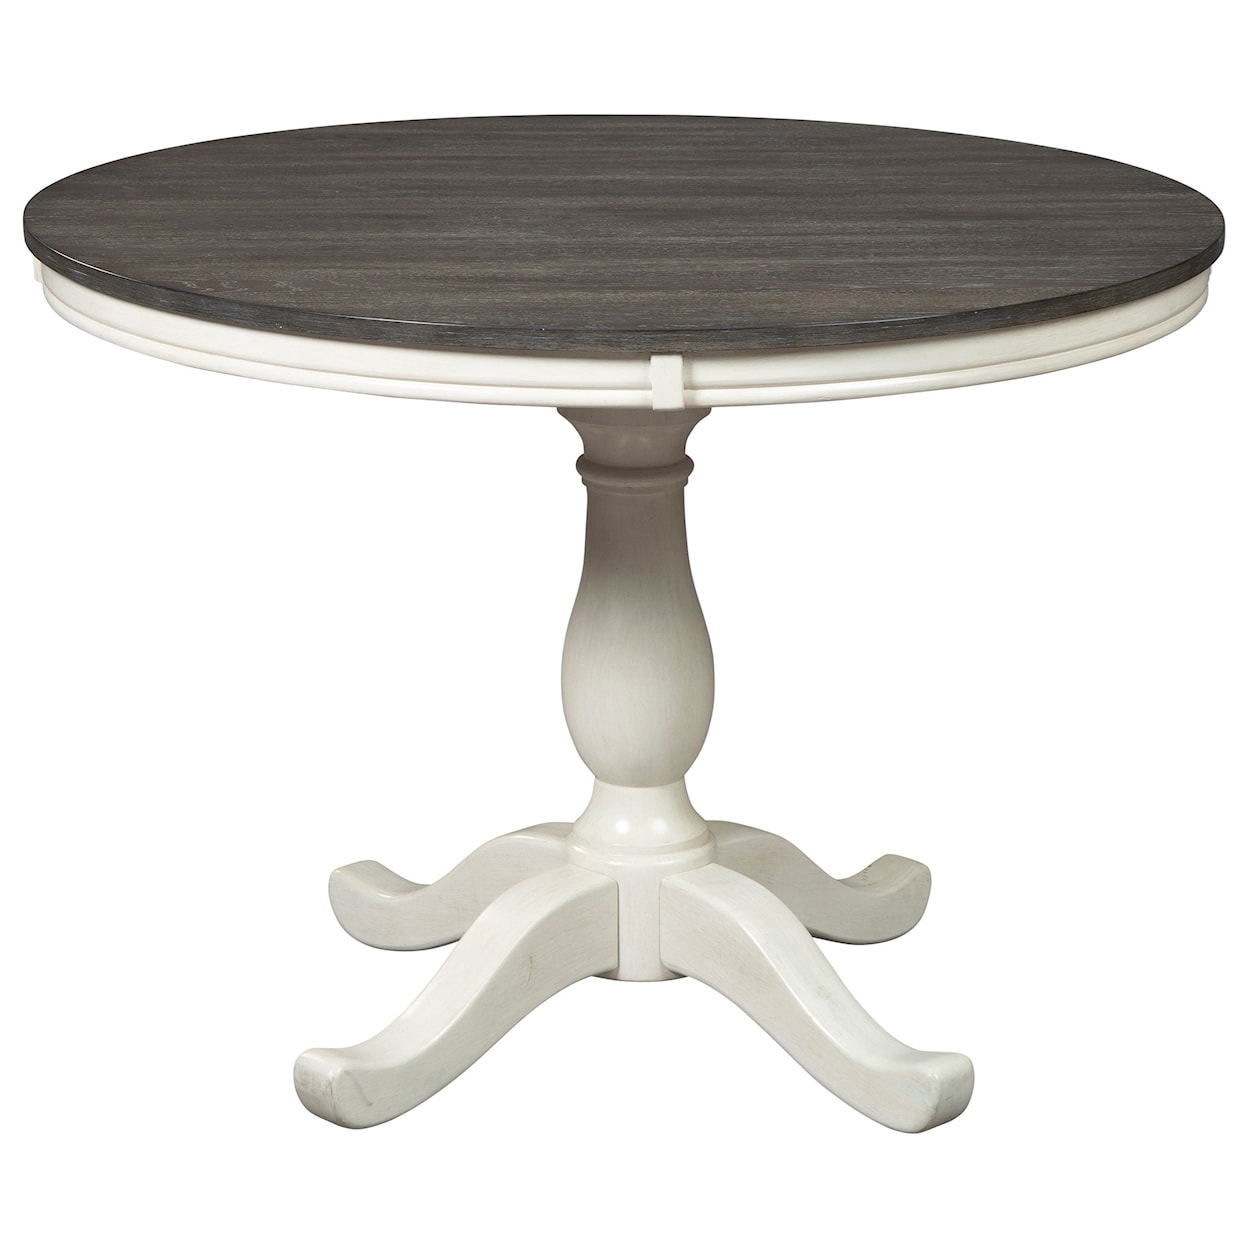 Signature Design by Ashley Nelling 3-Piece Round Dining Table Set